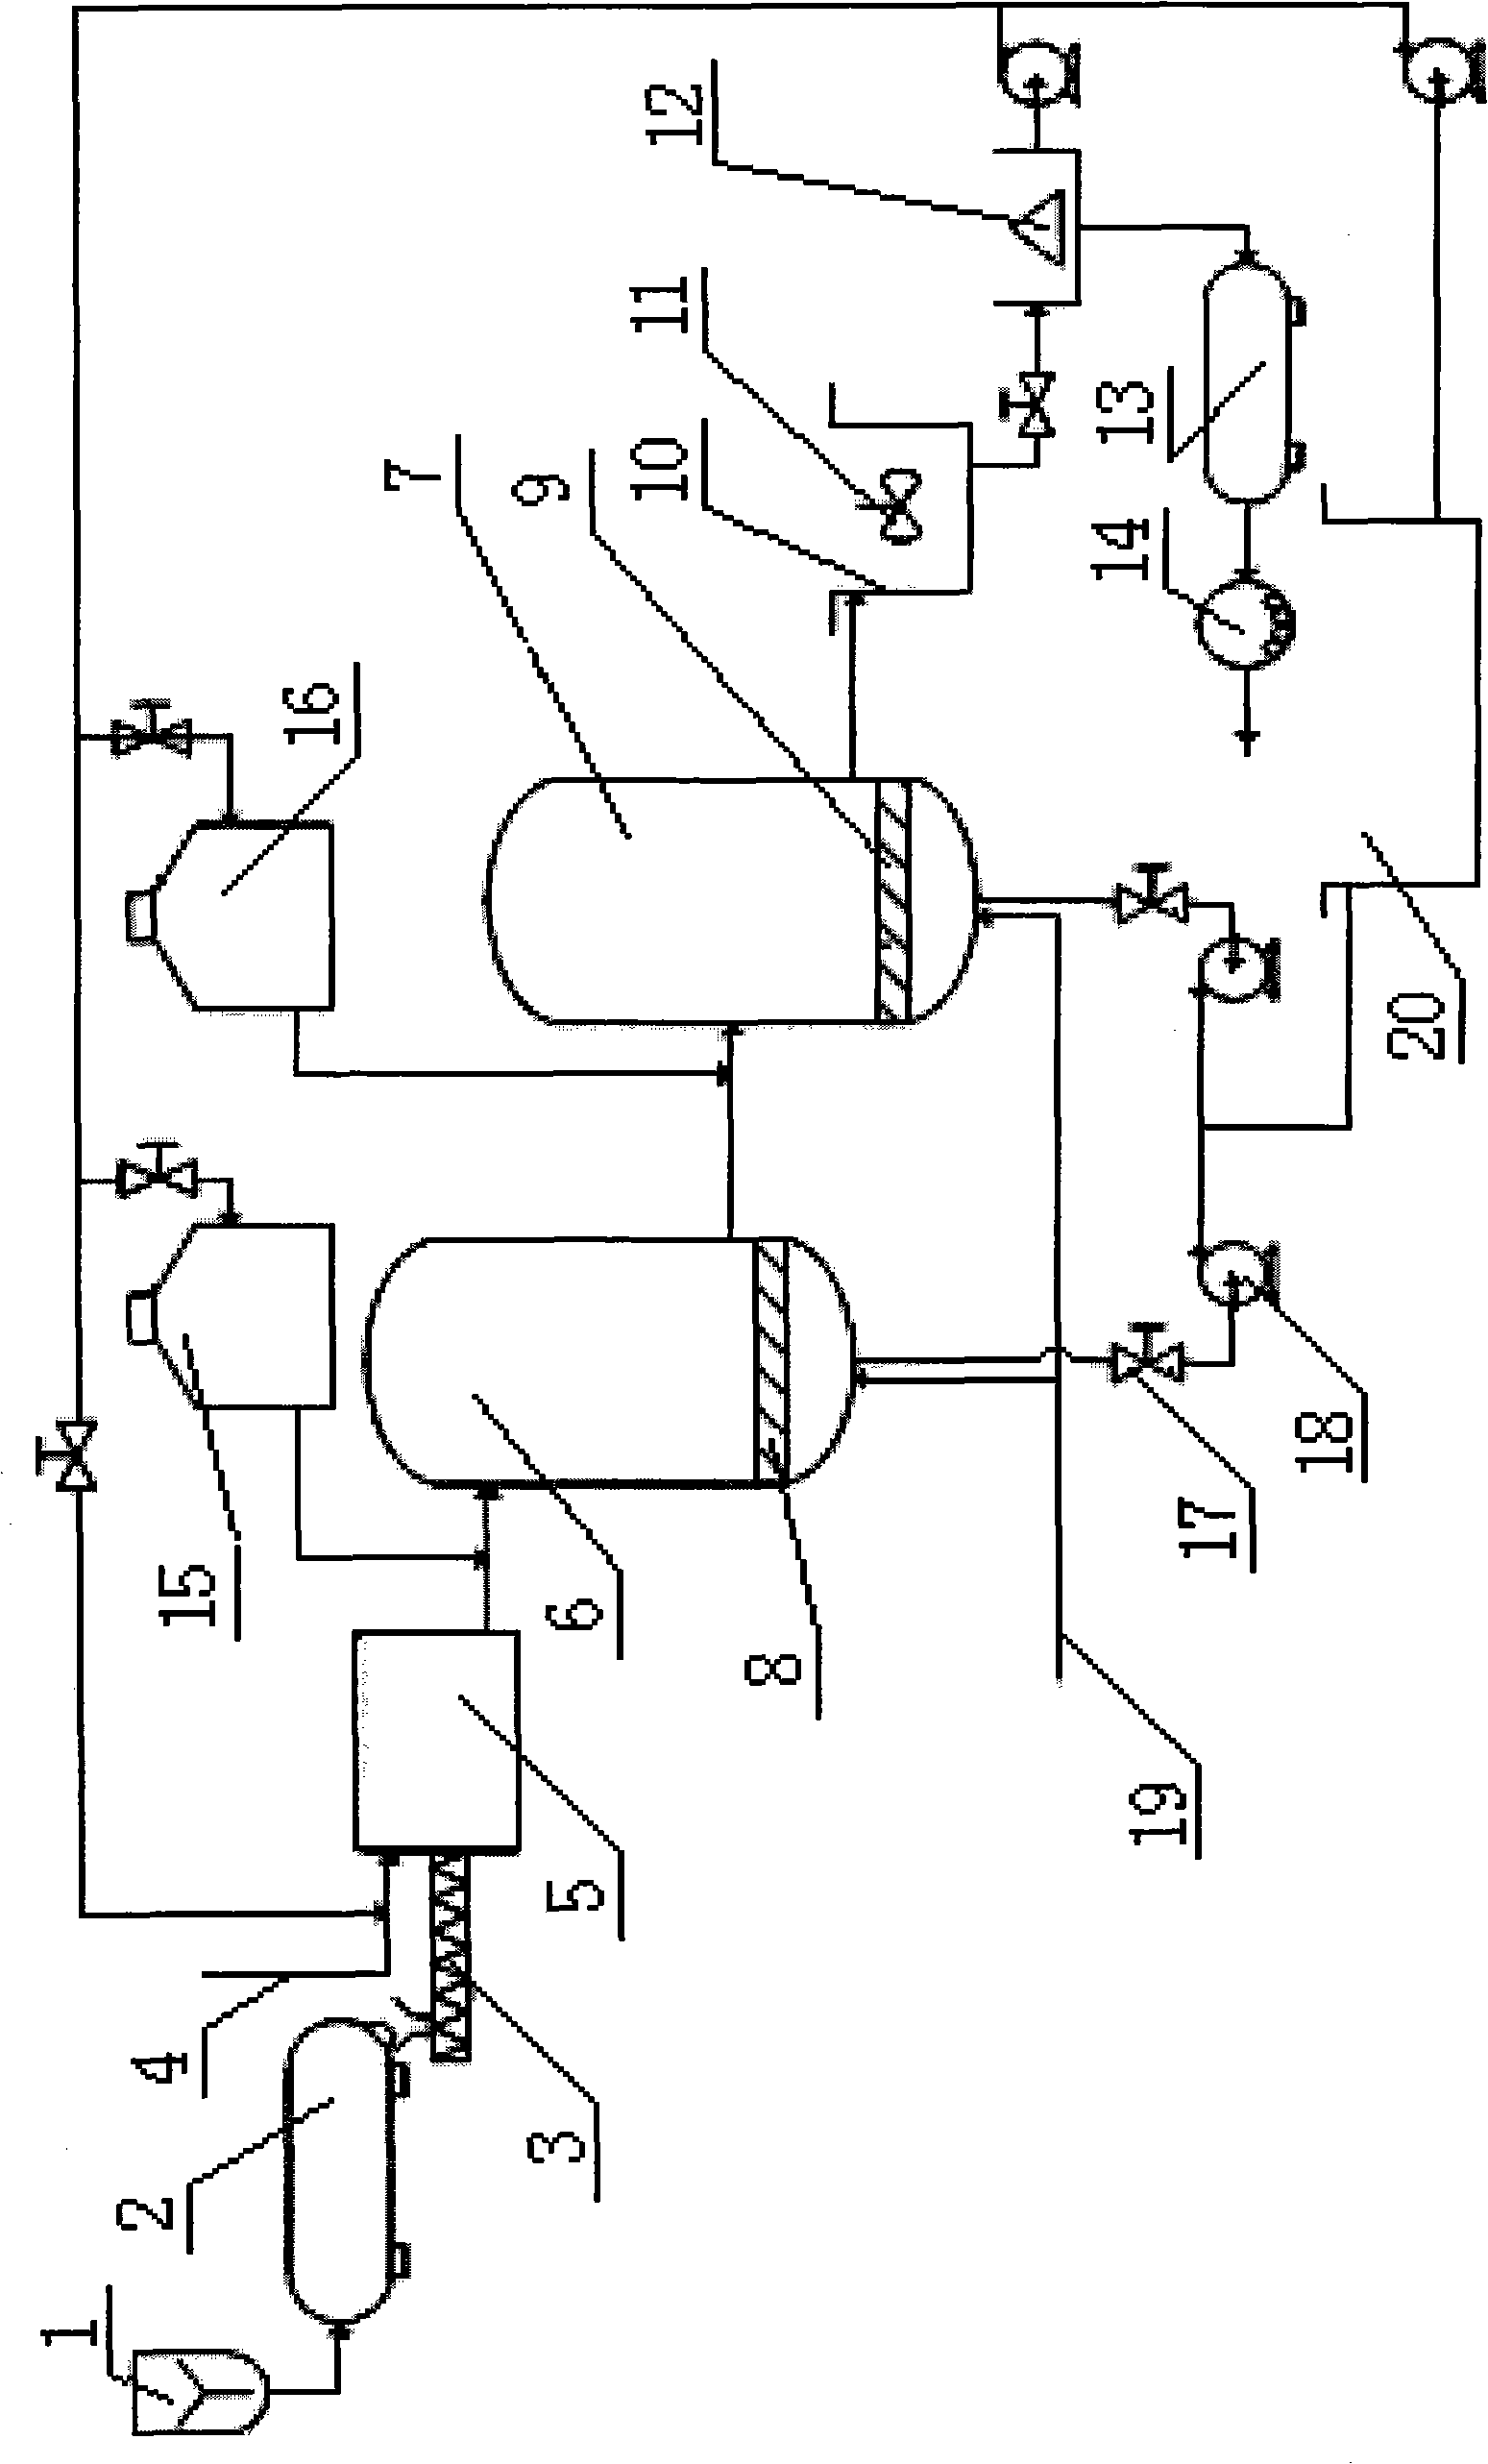 Method for separating and recovering carbon from pyrolysis residue of sludge containing oil